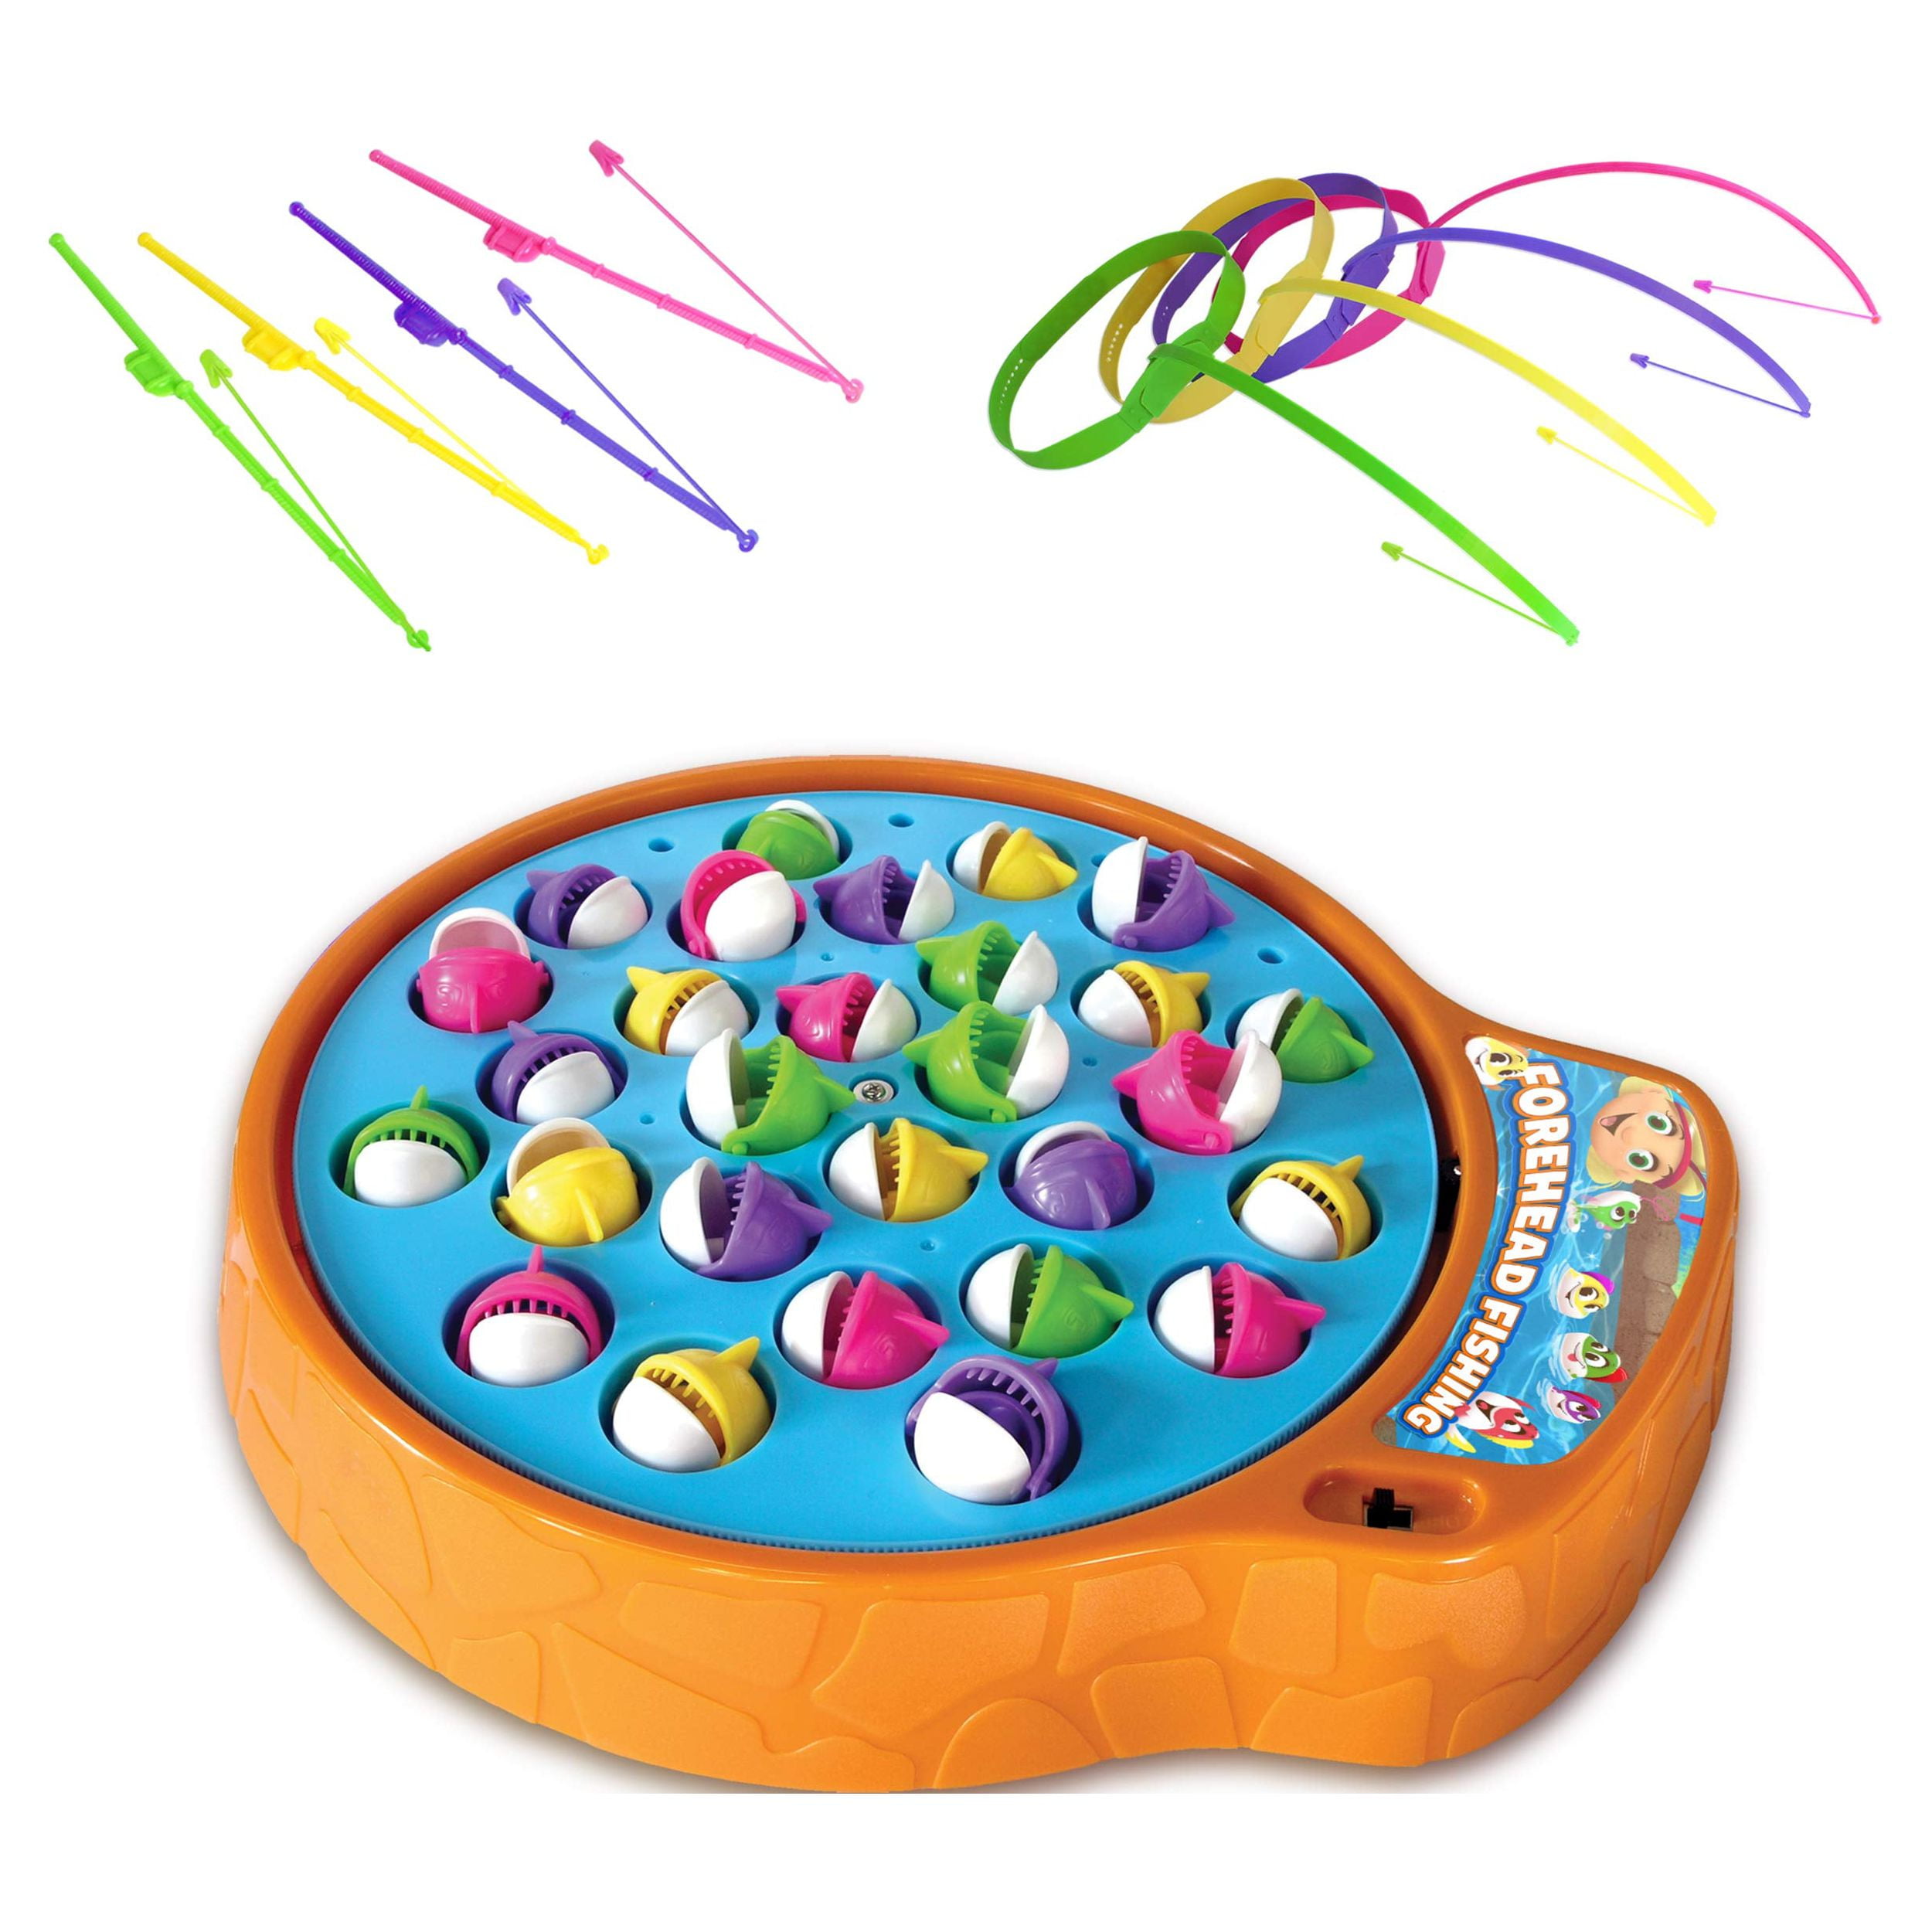 Fishing Life   - Brain Games for Kids and Adults